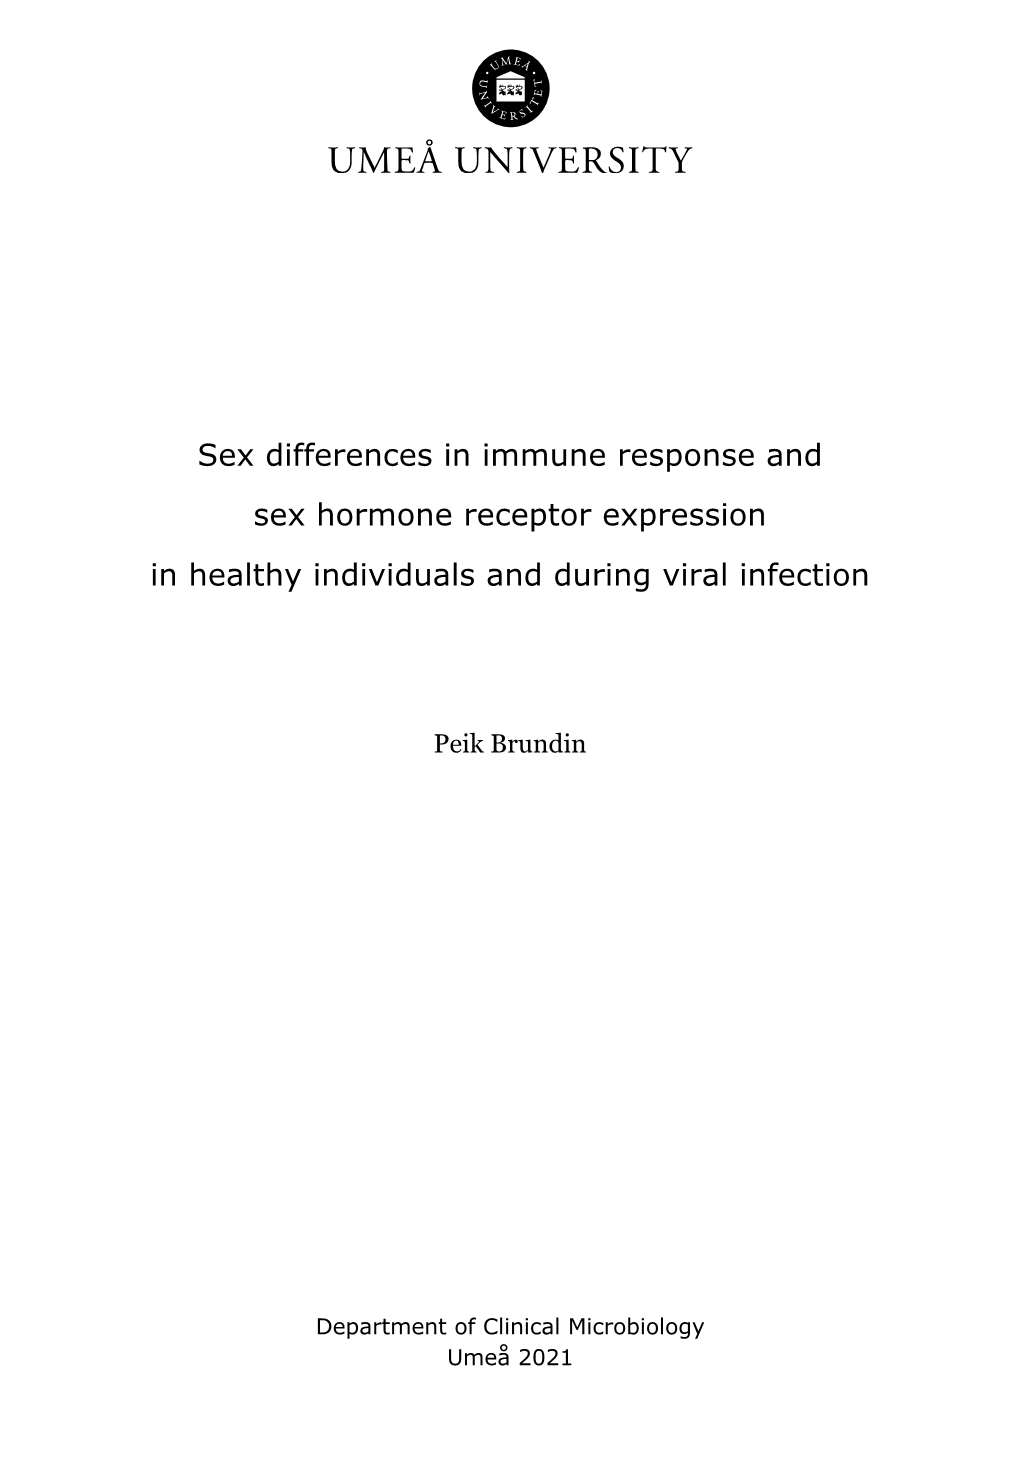 Sex Differences in Immune Response and Sex Hormone Receptor Expression in Healthy Individuals and During Viral Infection